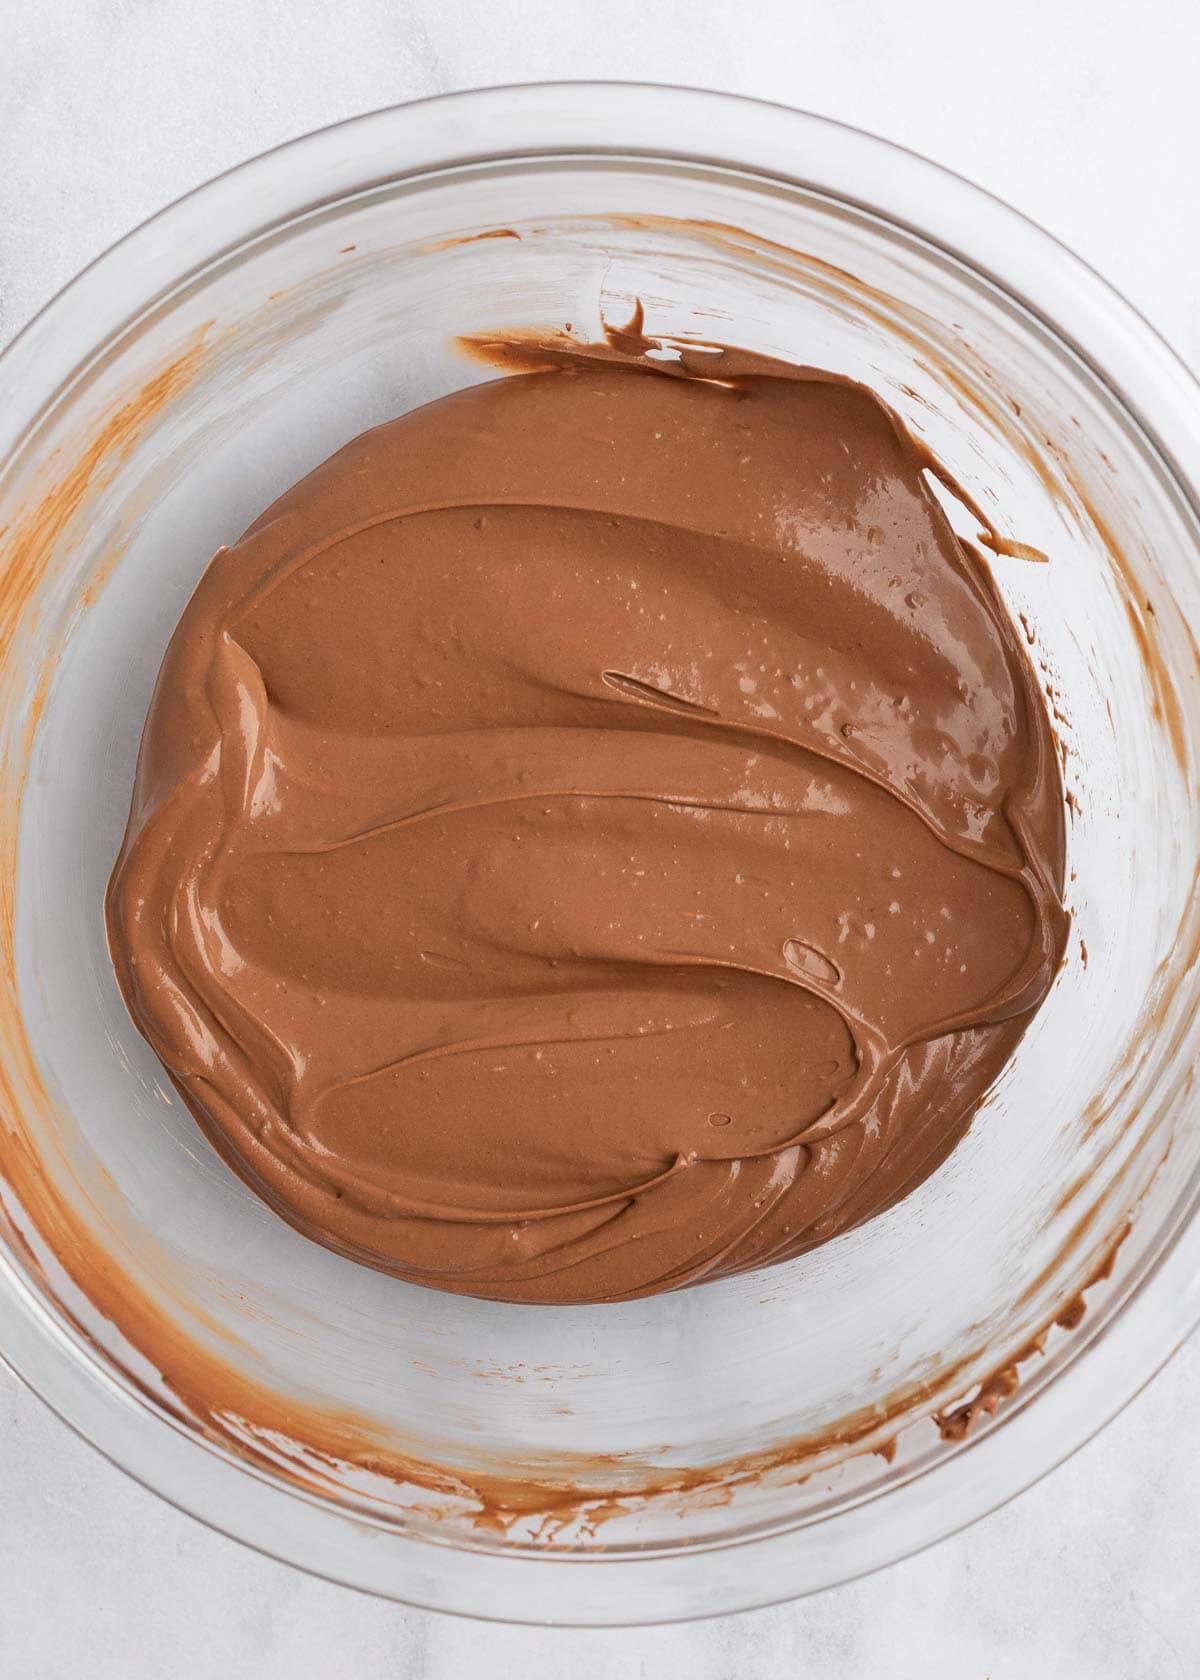 A bowl of chocolate frosting